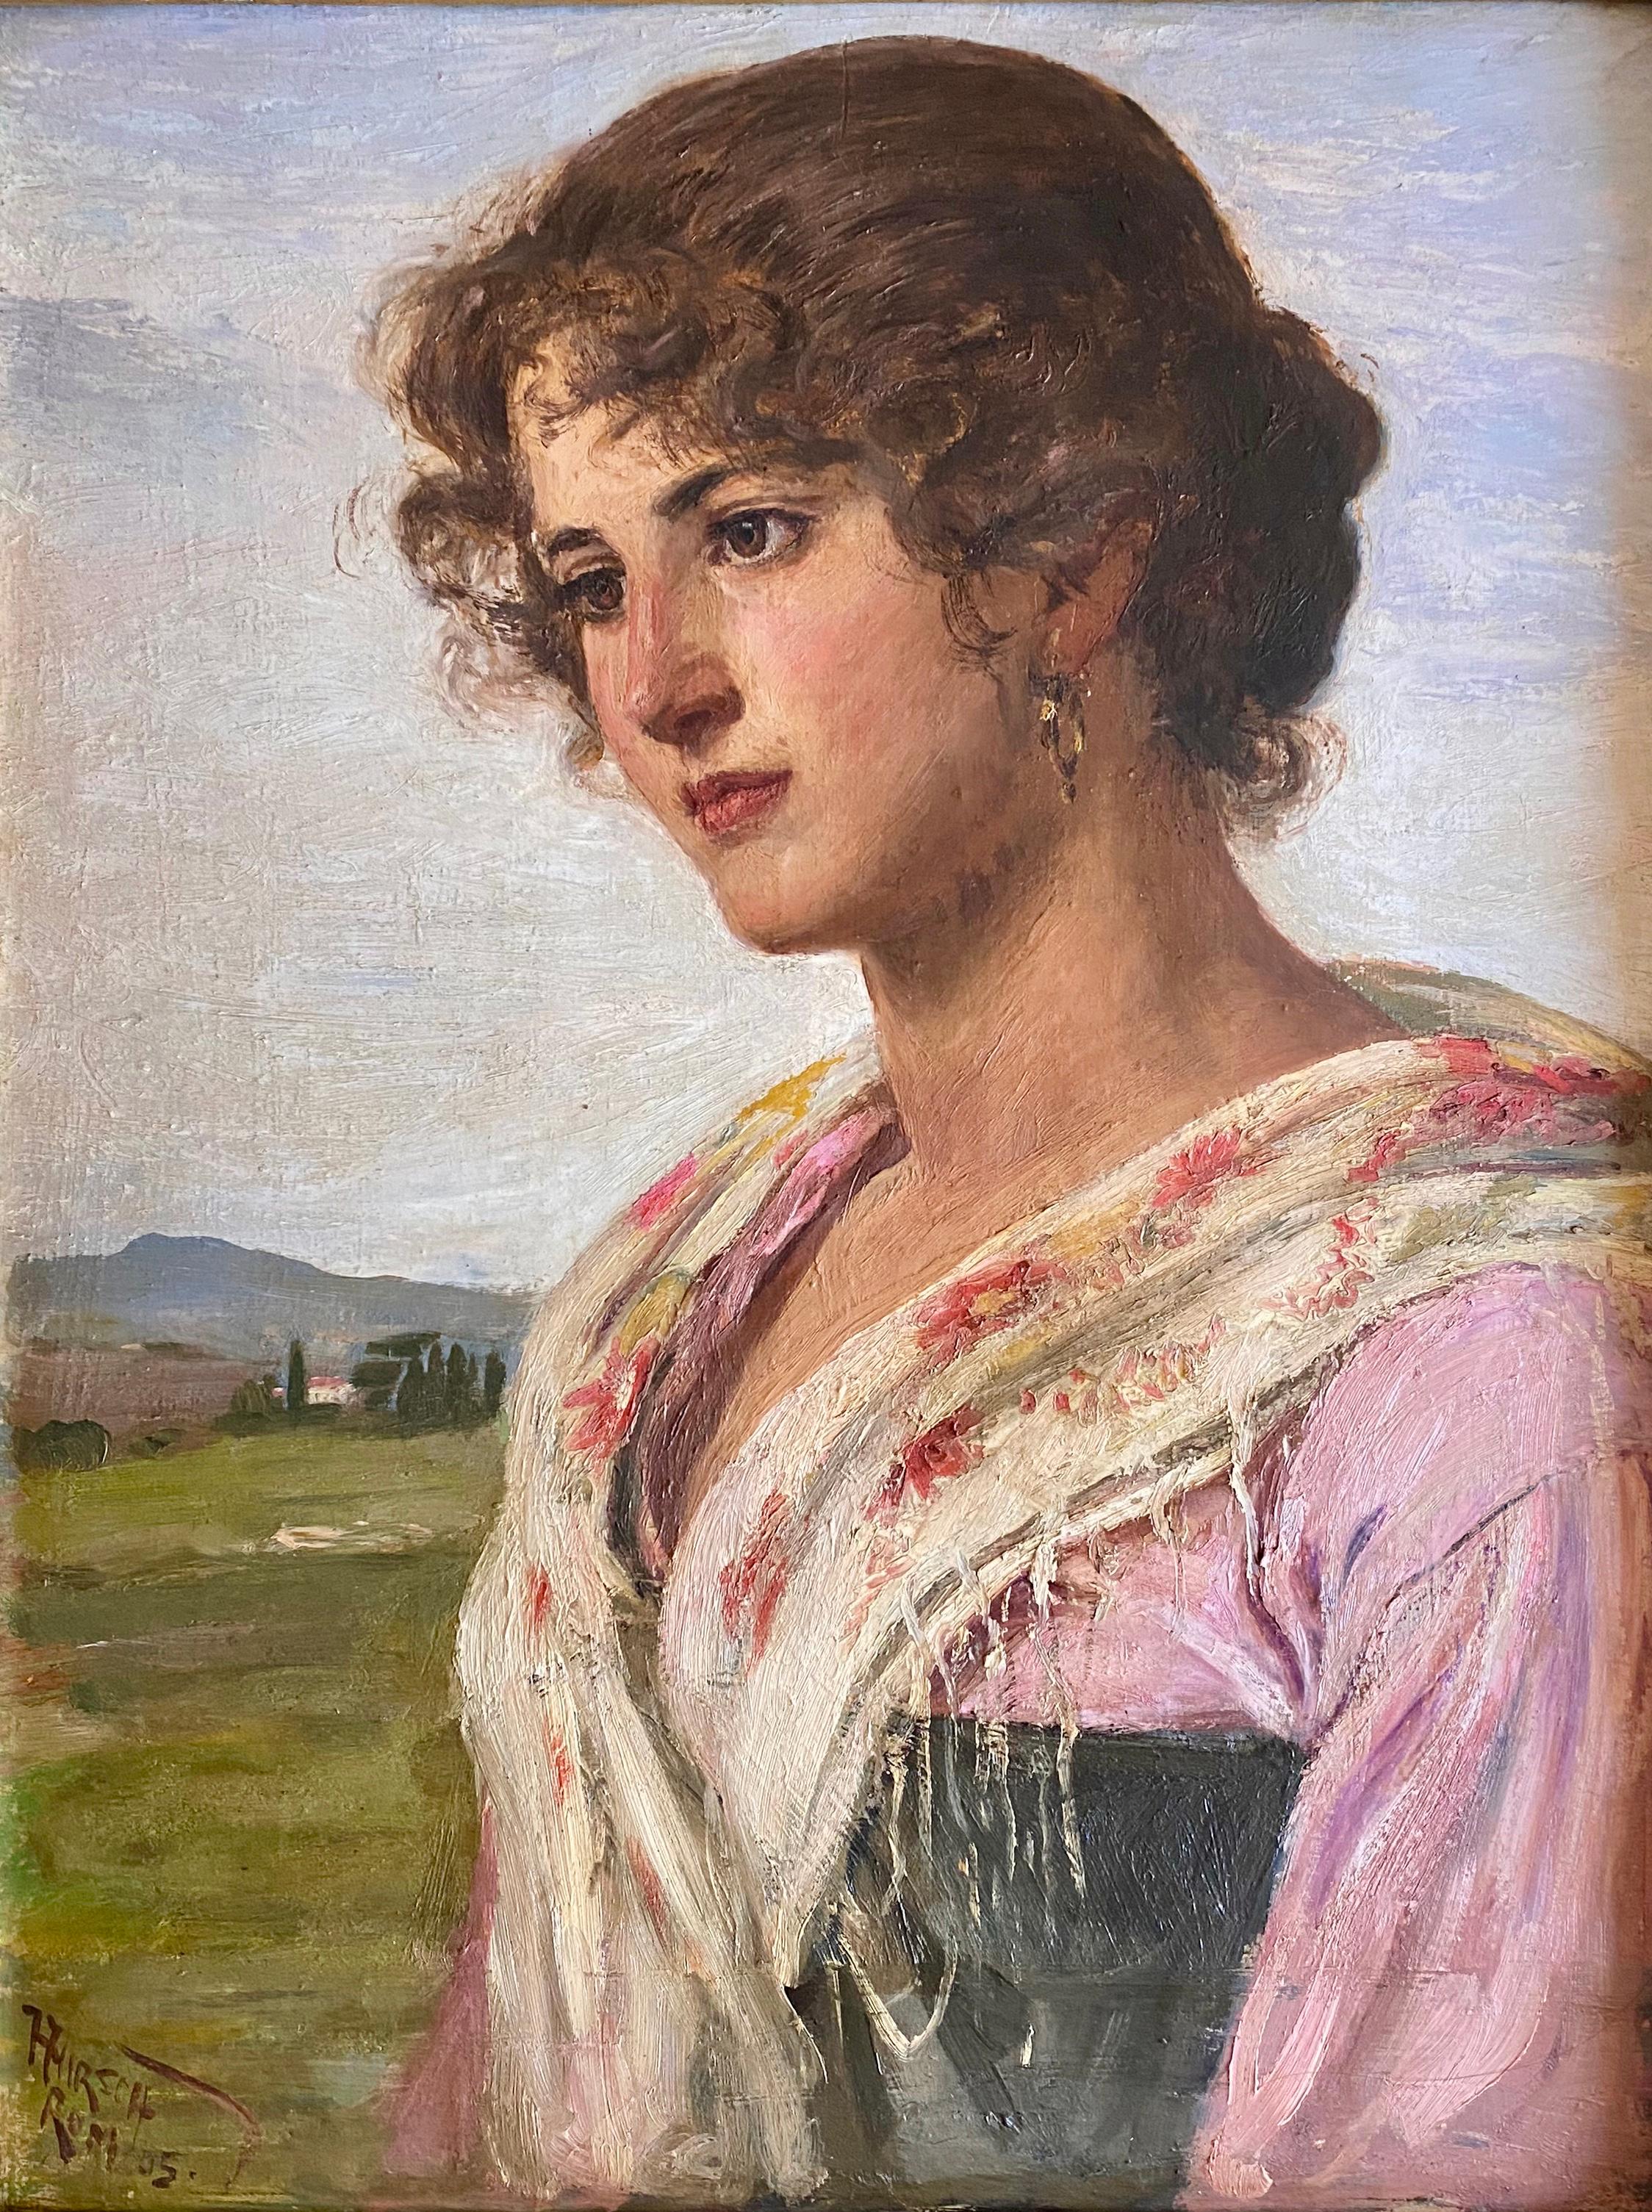 Best of Europe:The Roman Girl Sensitive Portrait of a Young Woman Italy - Painting by Hermann Hirsch